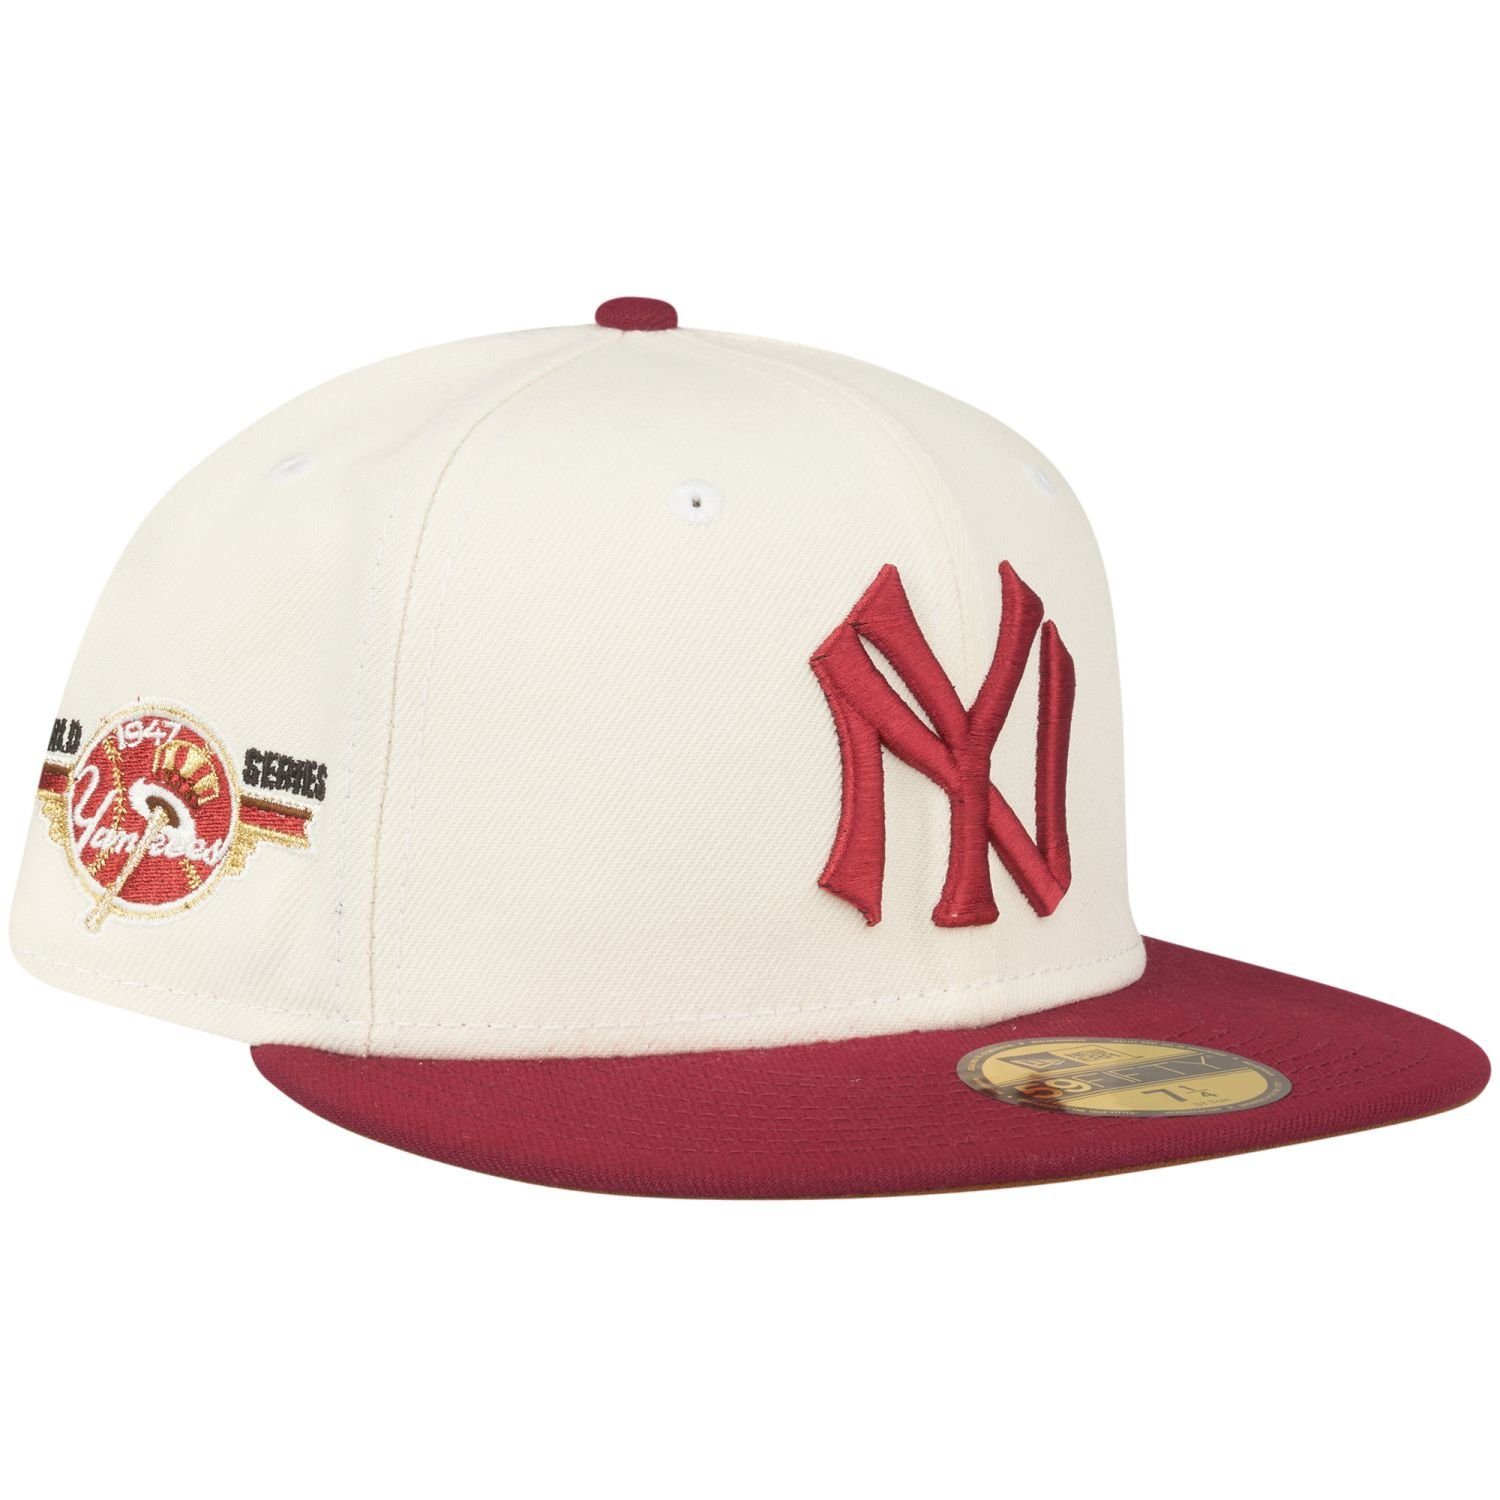 New 1947 Fitted York Cap 59Fifty New Yankees Era COOPERSTOWN